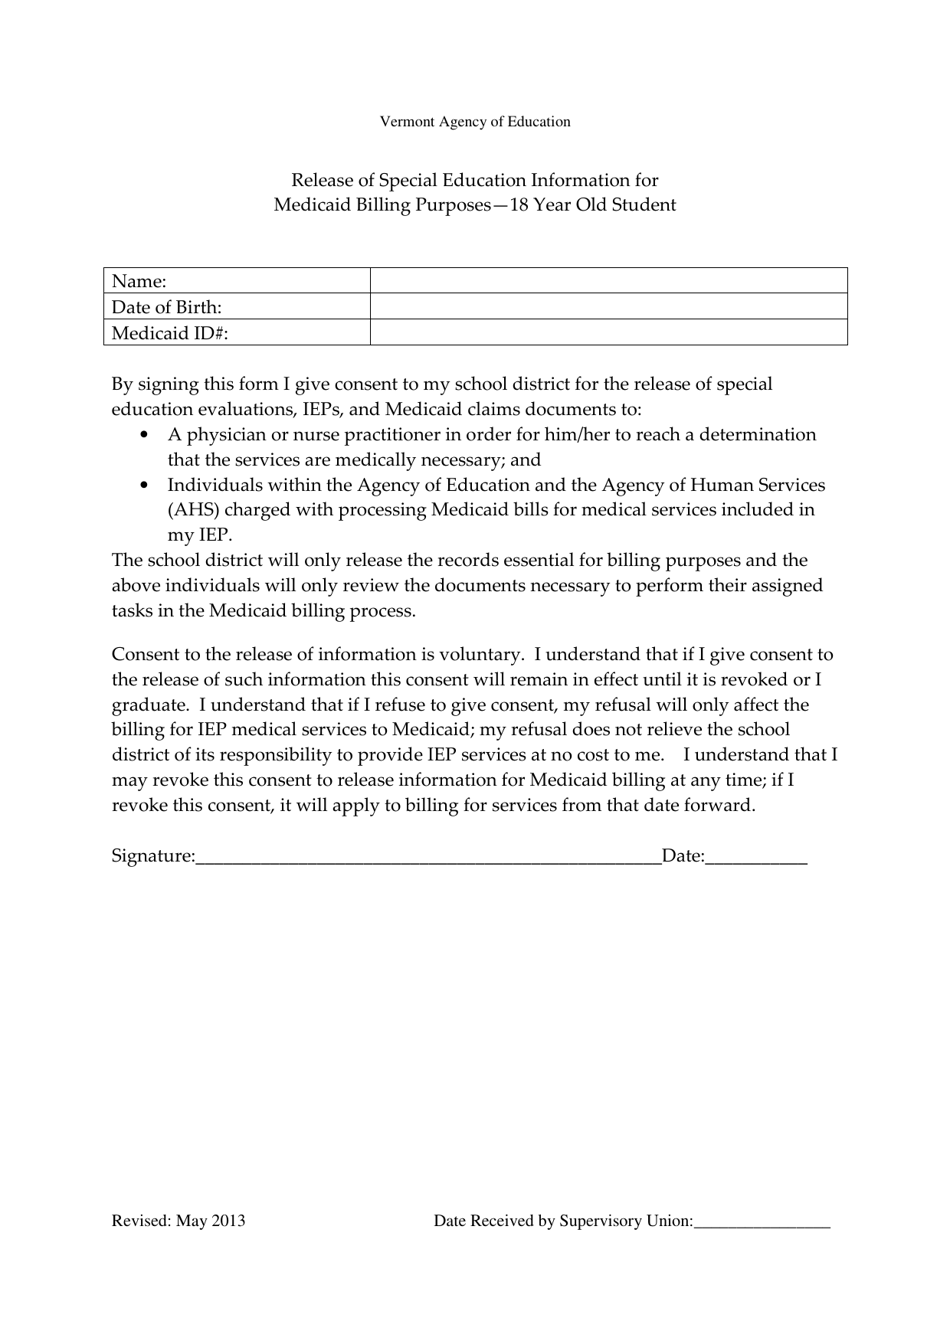 Release of Special Education Information for Medicaid Billing Purposes - 18 Year Old Student - Vermont, Page 1